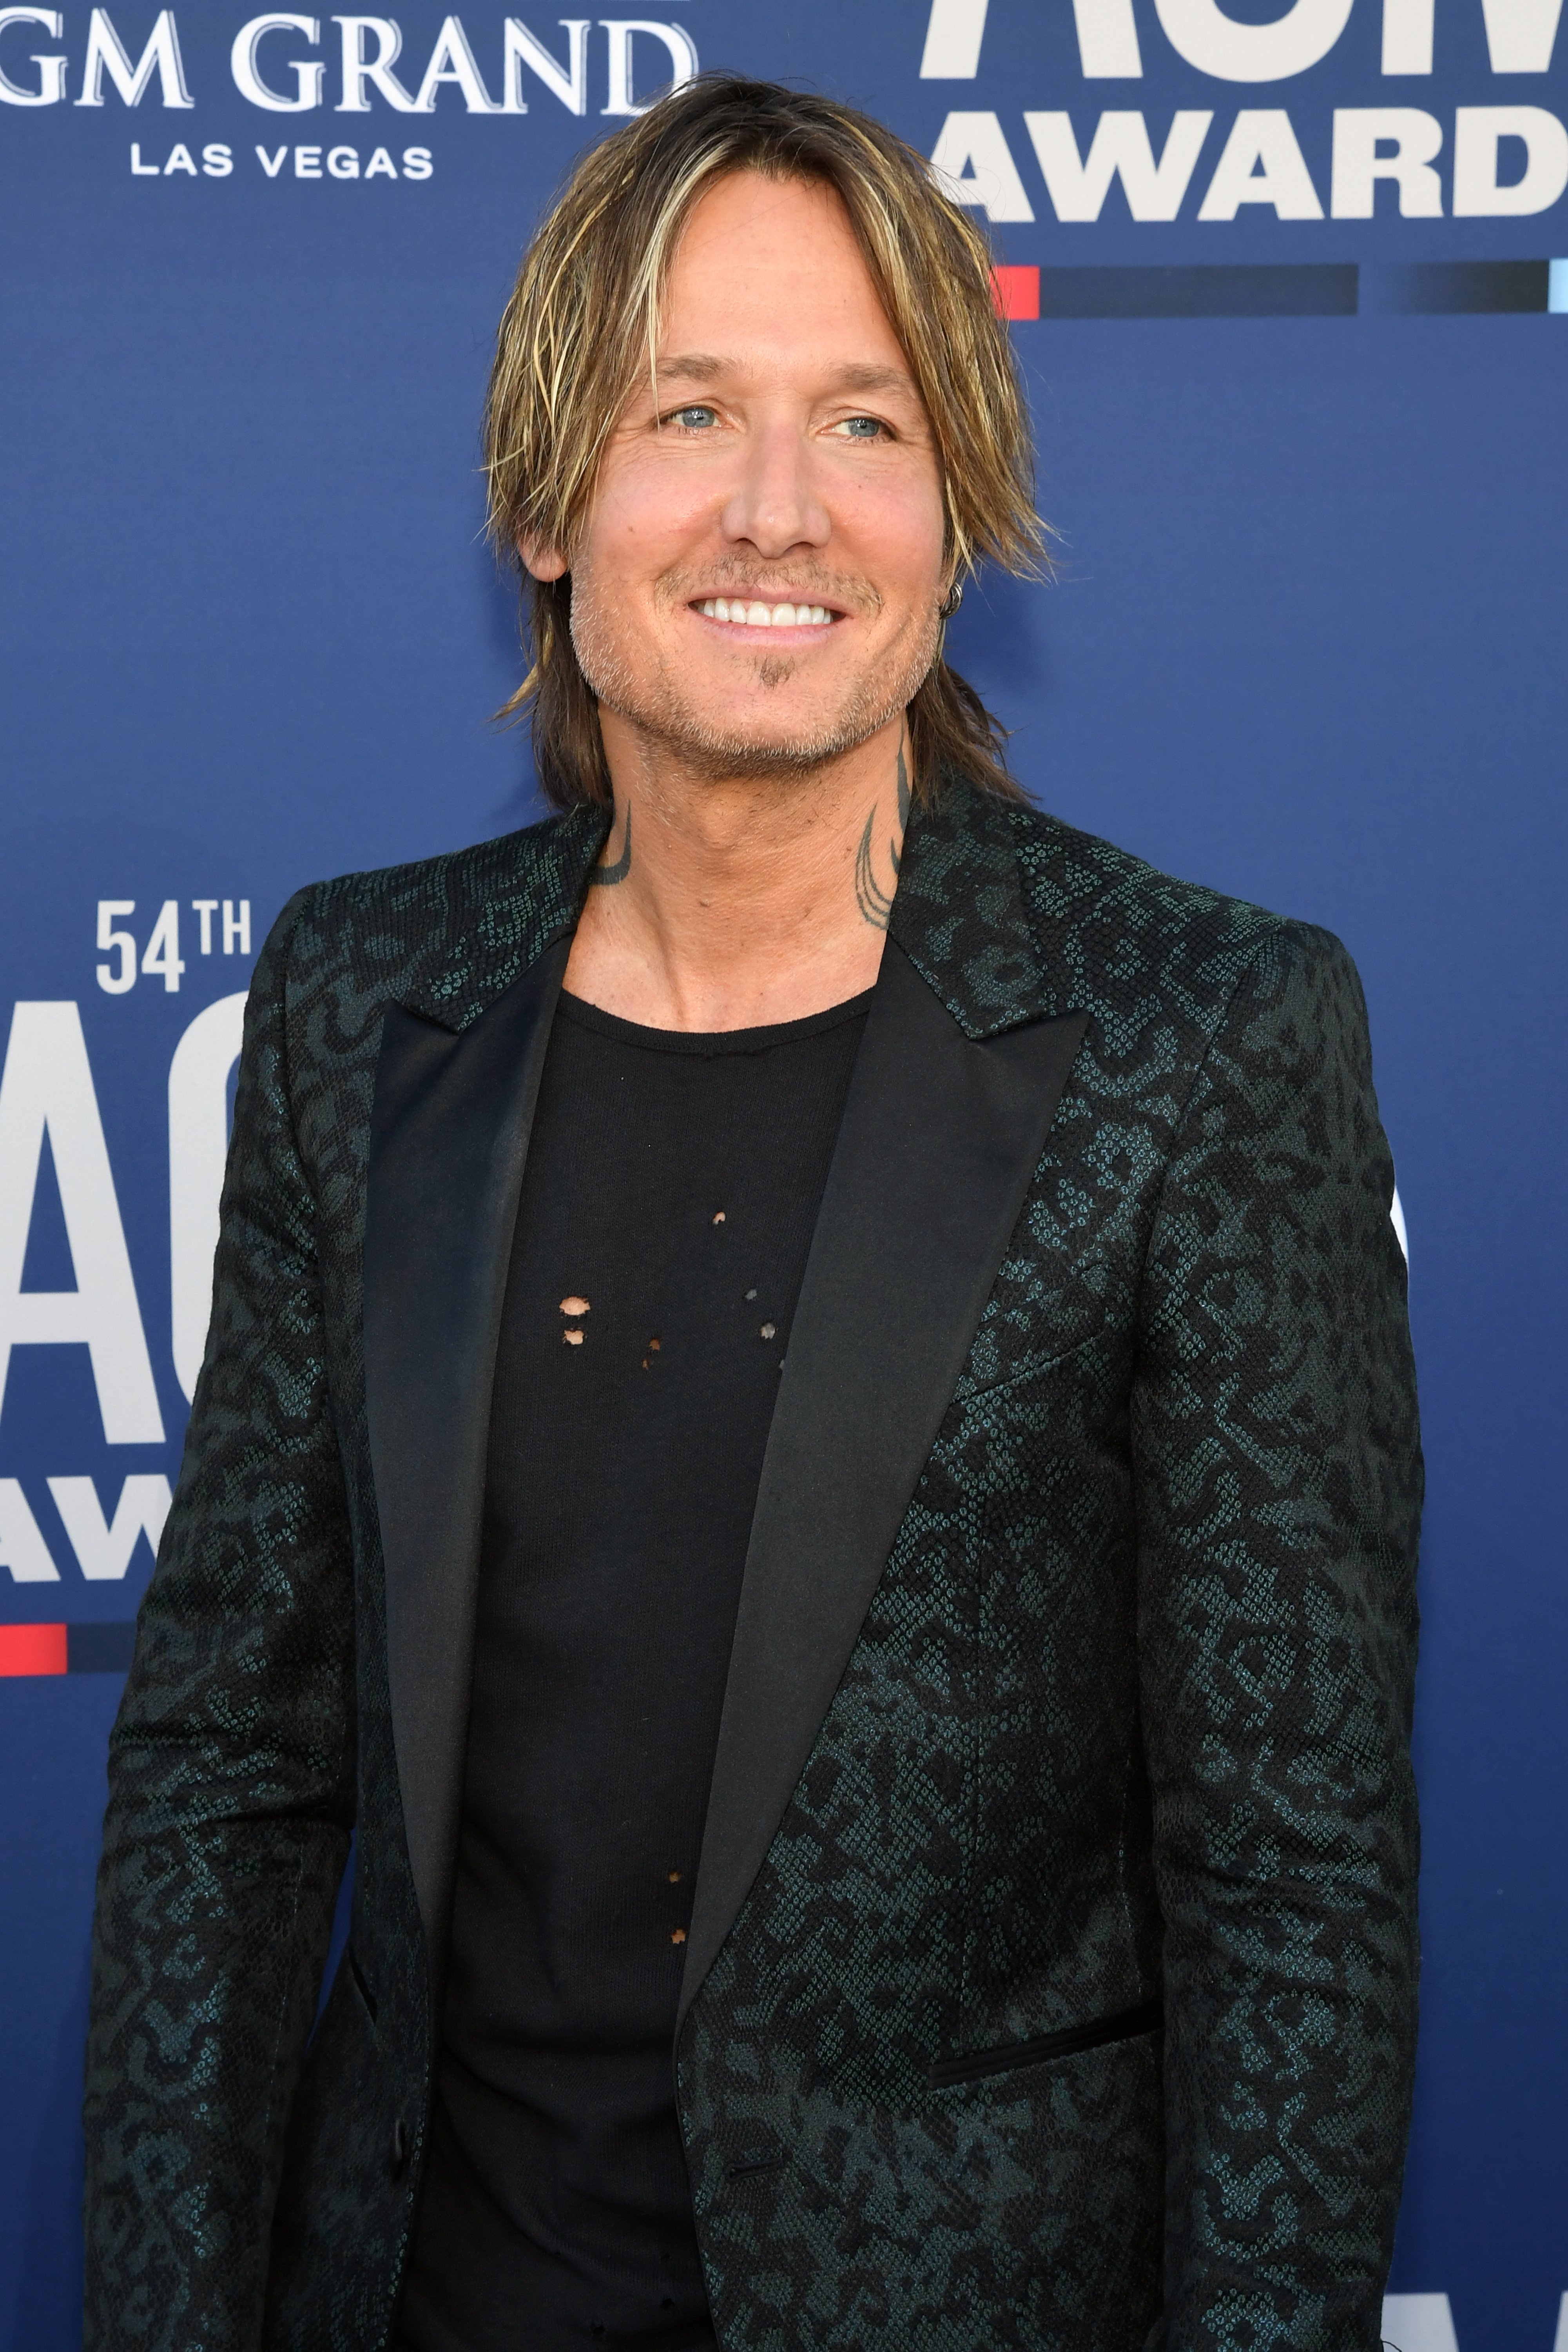 Keith Urban at the 54th Academy Of Country Music Awards in Las Vegas, Nevada | Photo: Getty Images